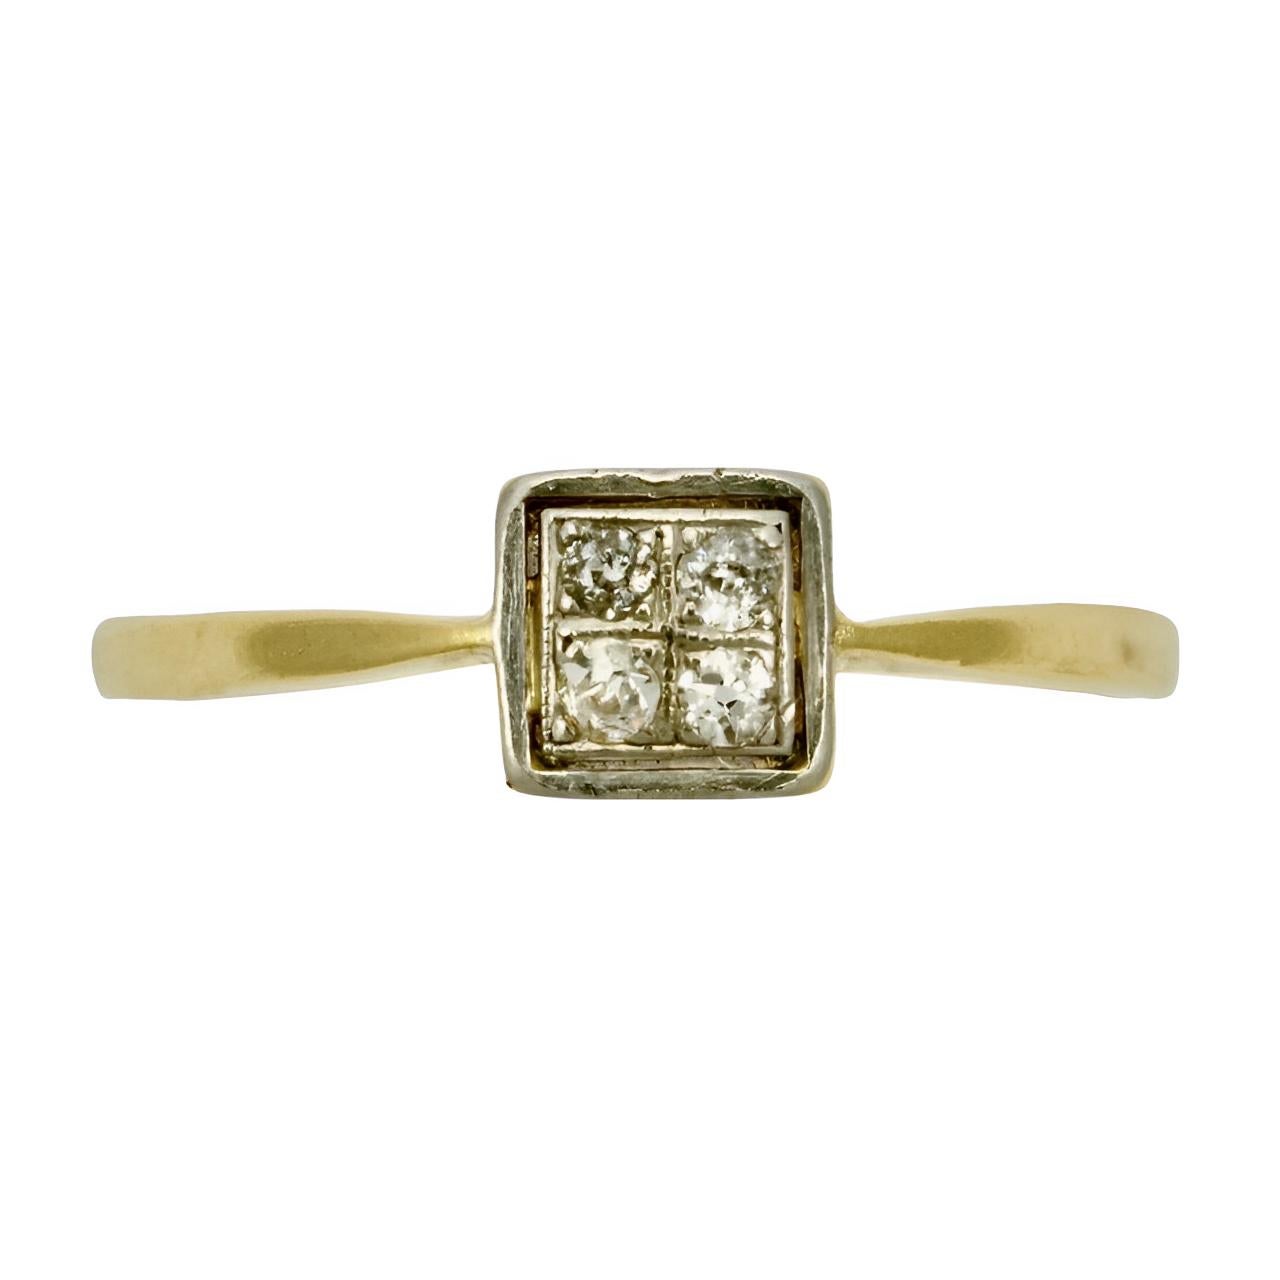 Art Deco beautiful gold cluster ring, set with four diamonds. The gold tests as 18K, and the white metal was usually platinum for this type of ring, not tested. Ring size UK S 1/2, US 9 3/8,  inside diameter 2 cm / .78 inch. The setting measures 6.5